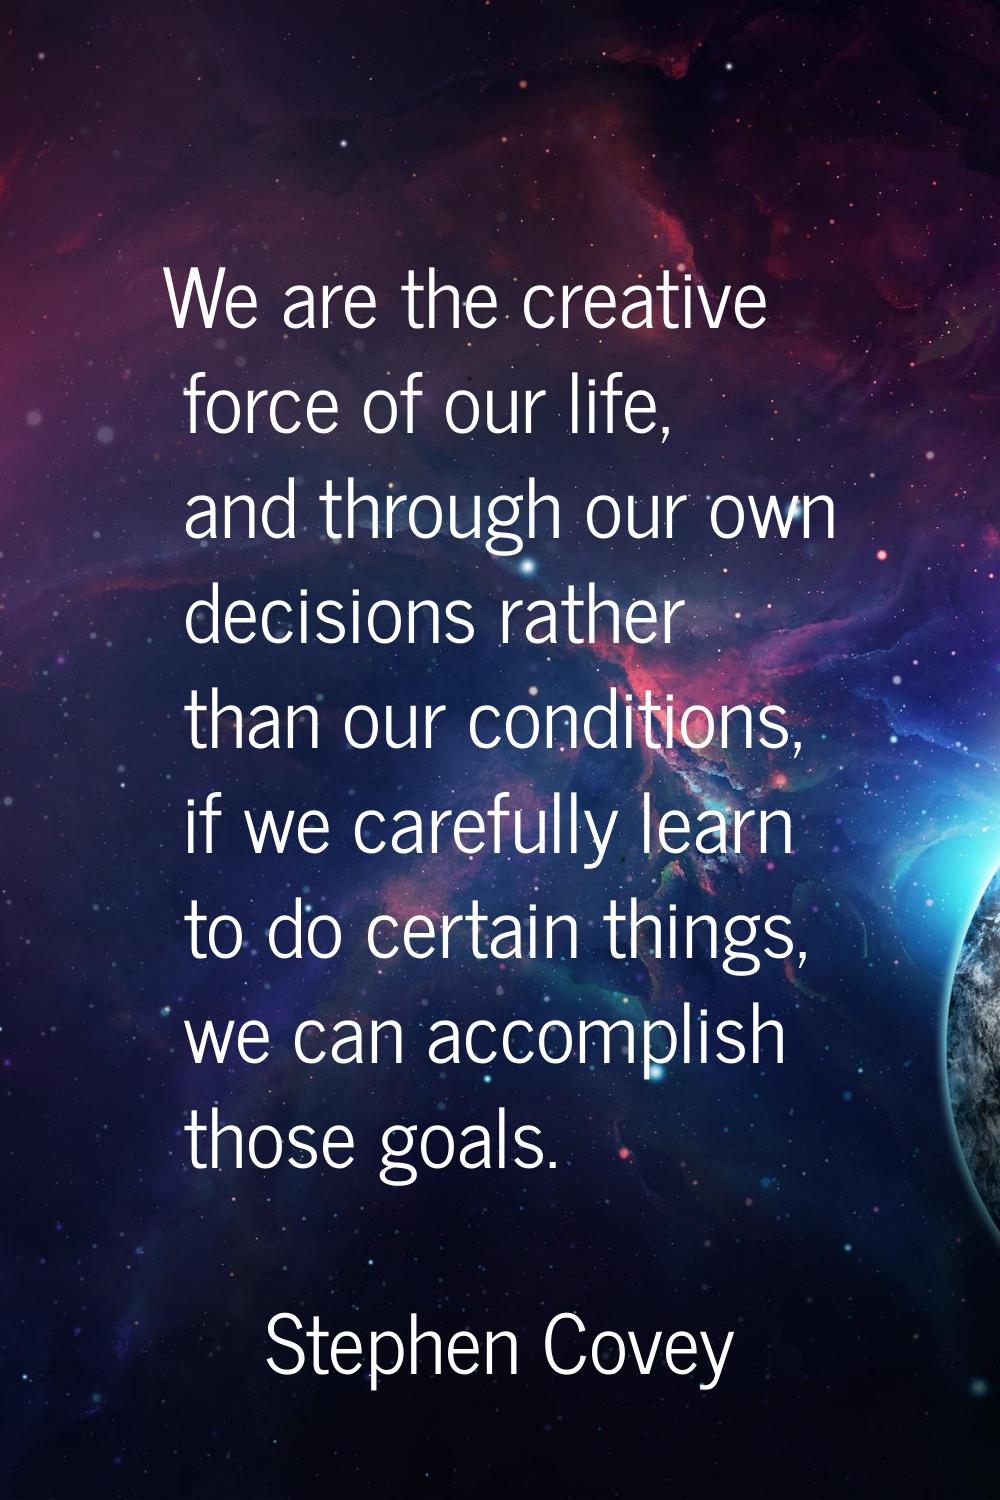 We are the creative force of our life, and through our own decisions rather than our conditions, if